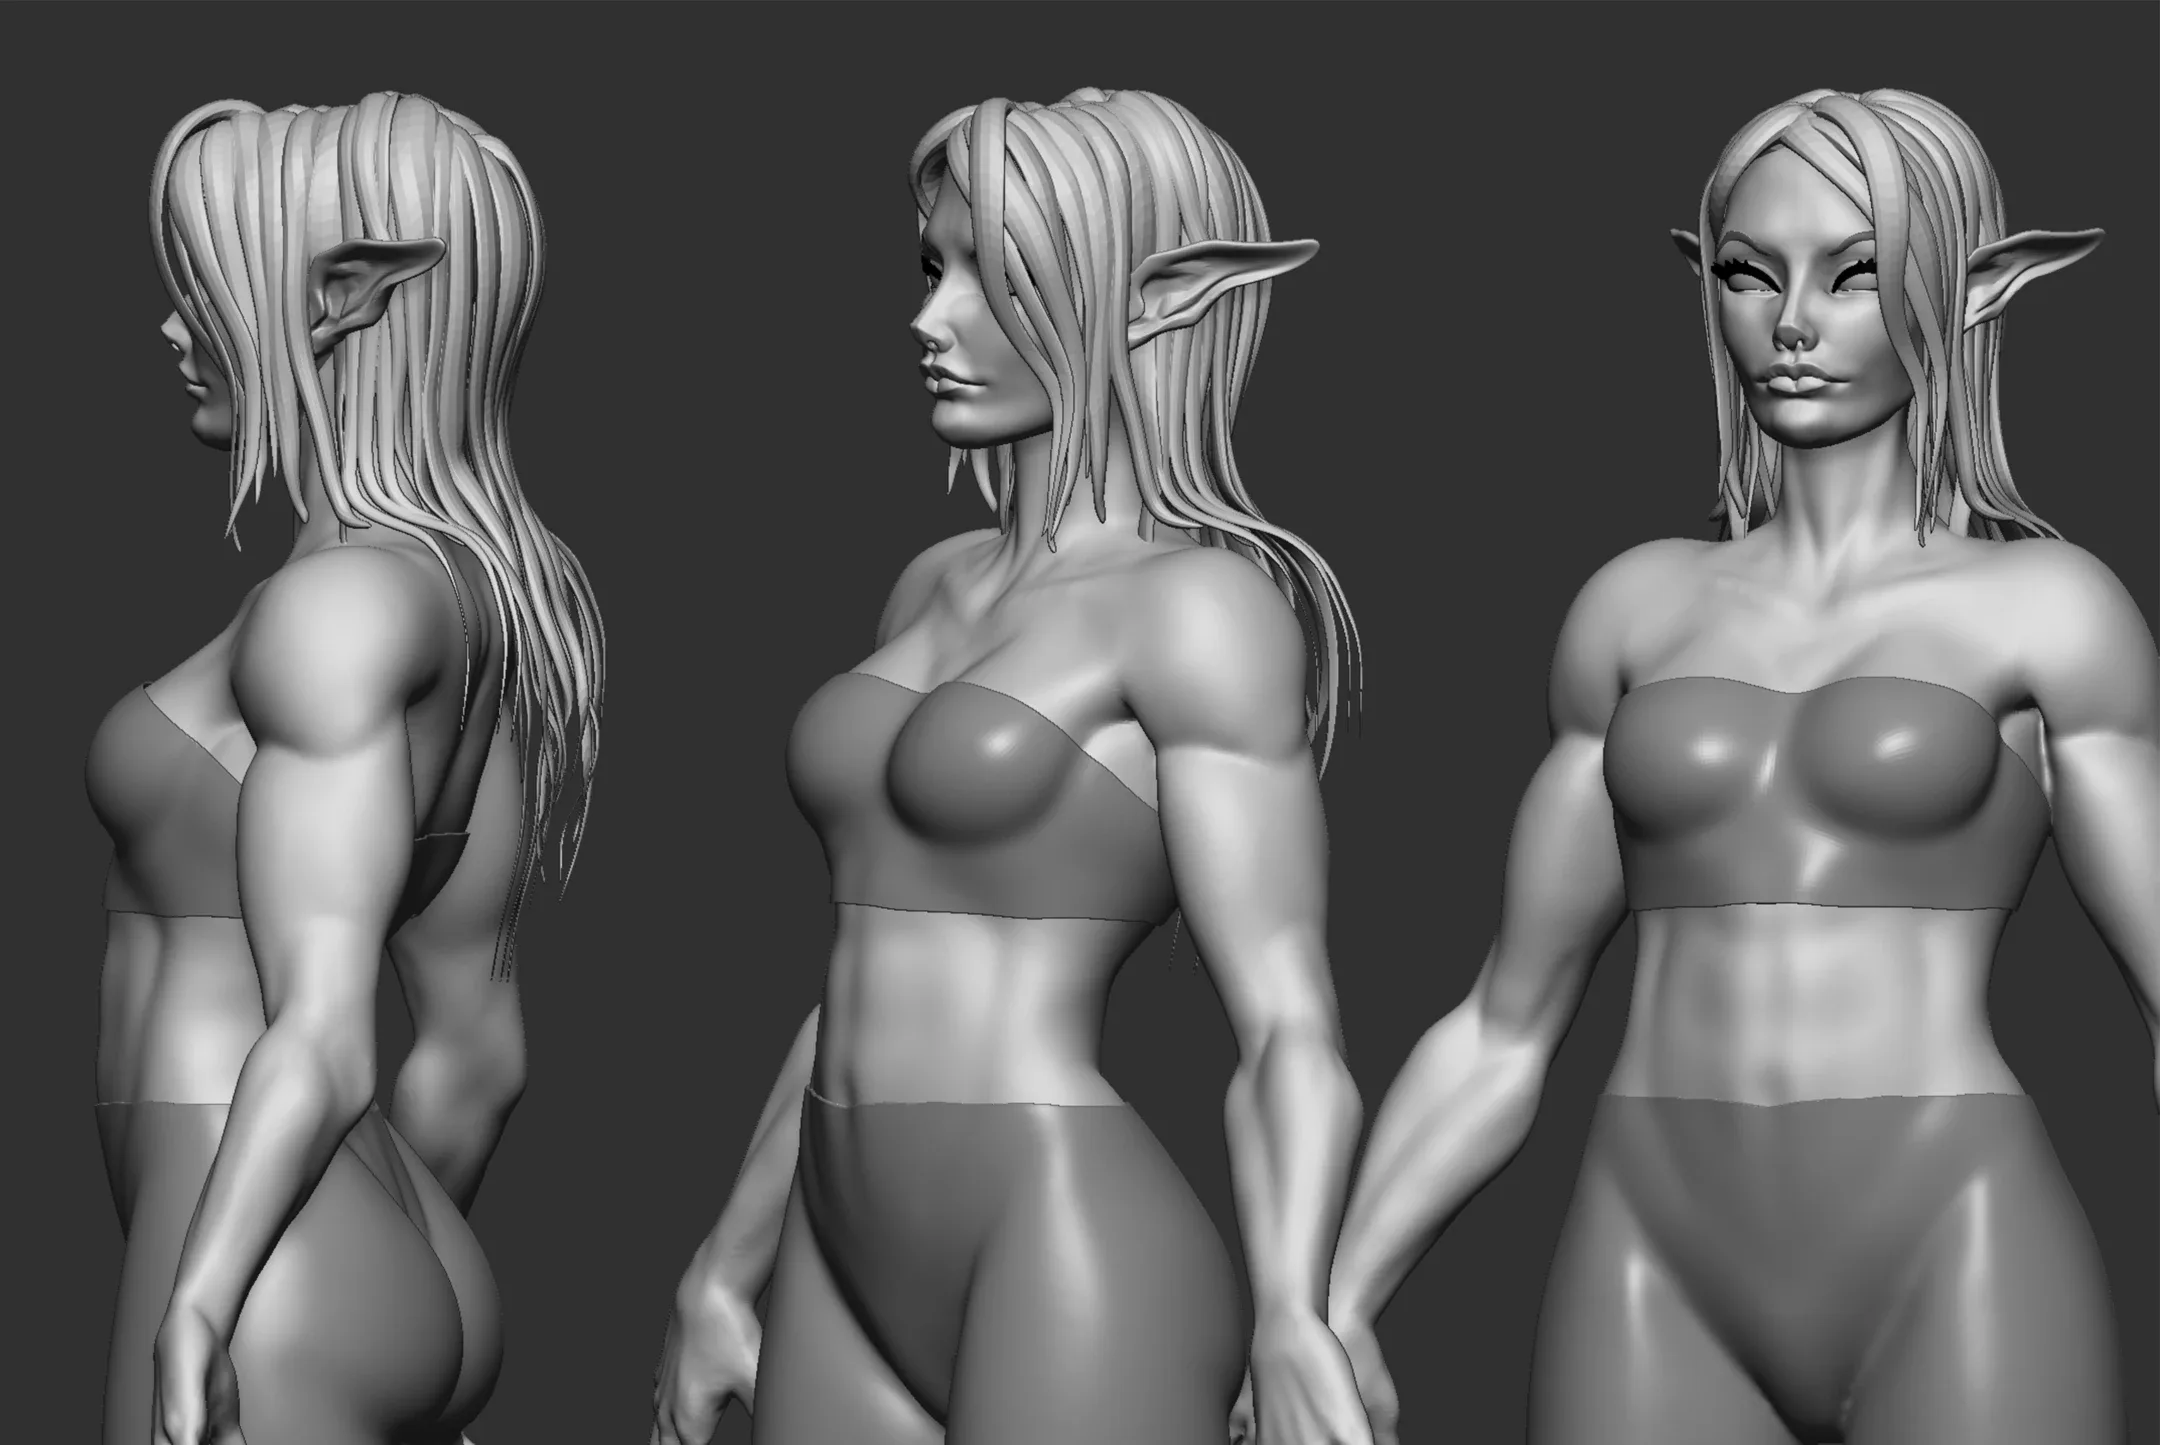 Zbrush - Sculpting Stylized Characters